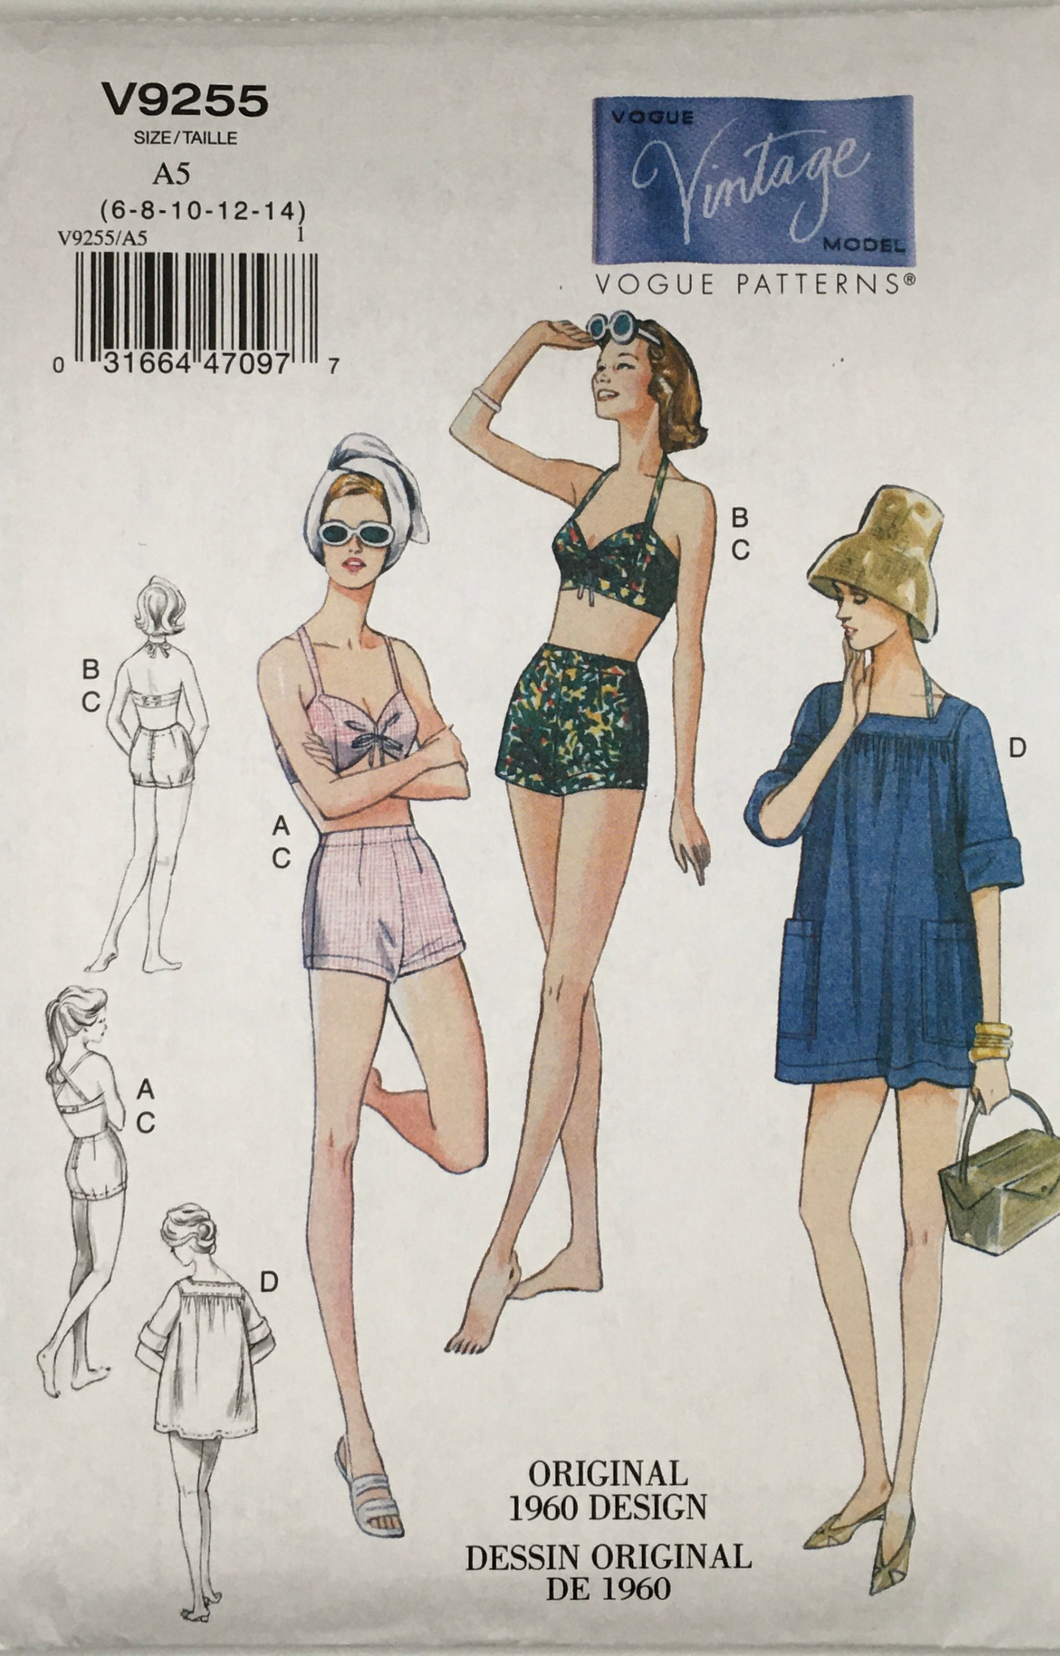 1960 Reproduction Sewing Pattern: Vogue V9255